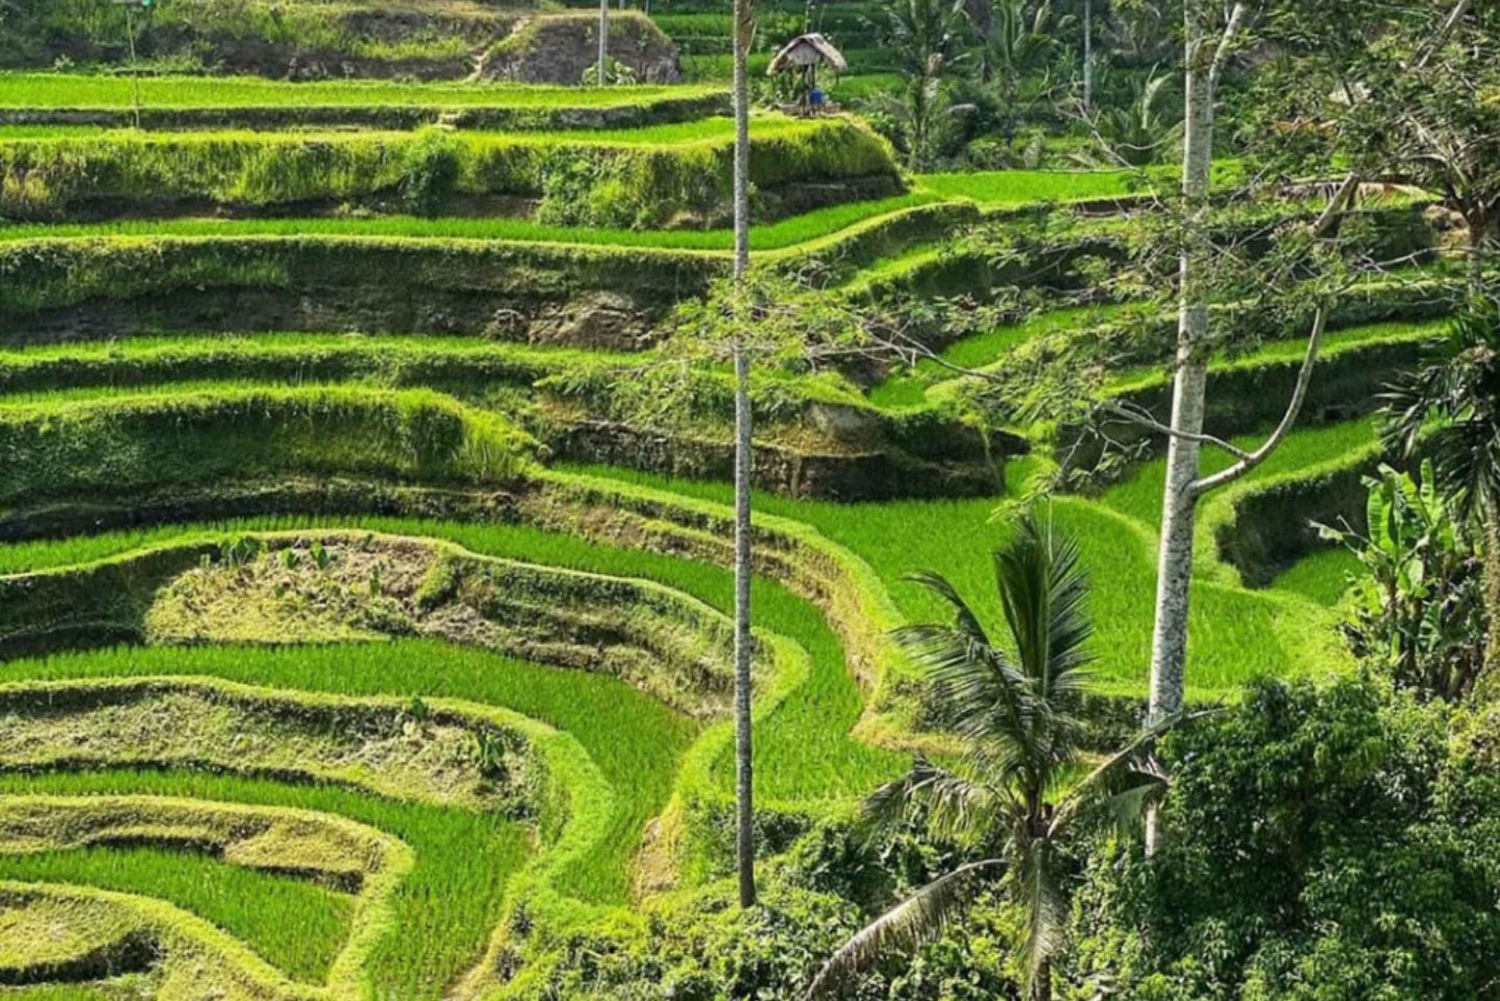 Ubud Full Day Tour Packages - 2 Days Adventure